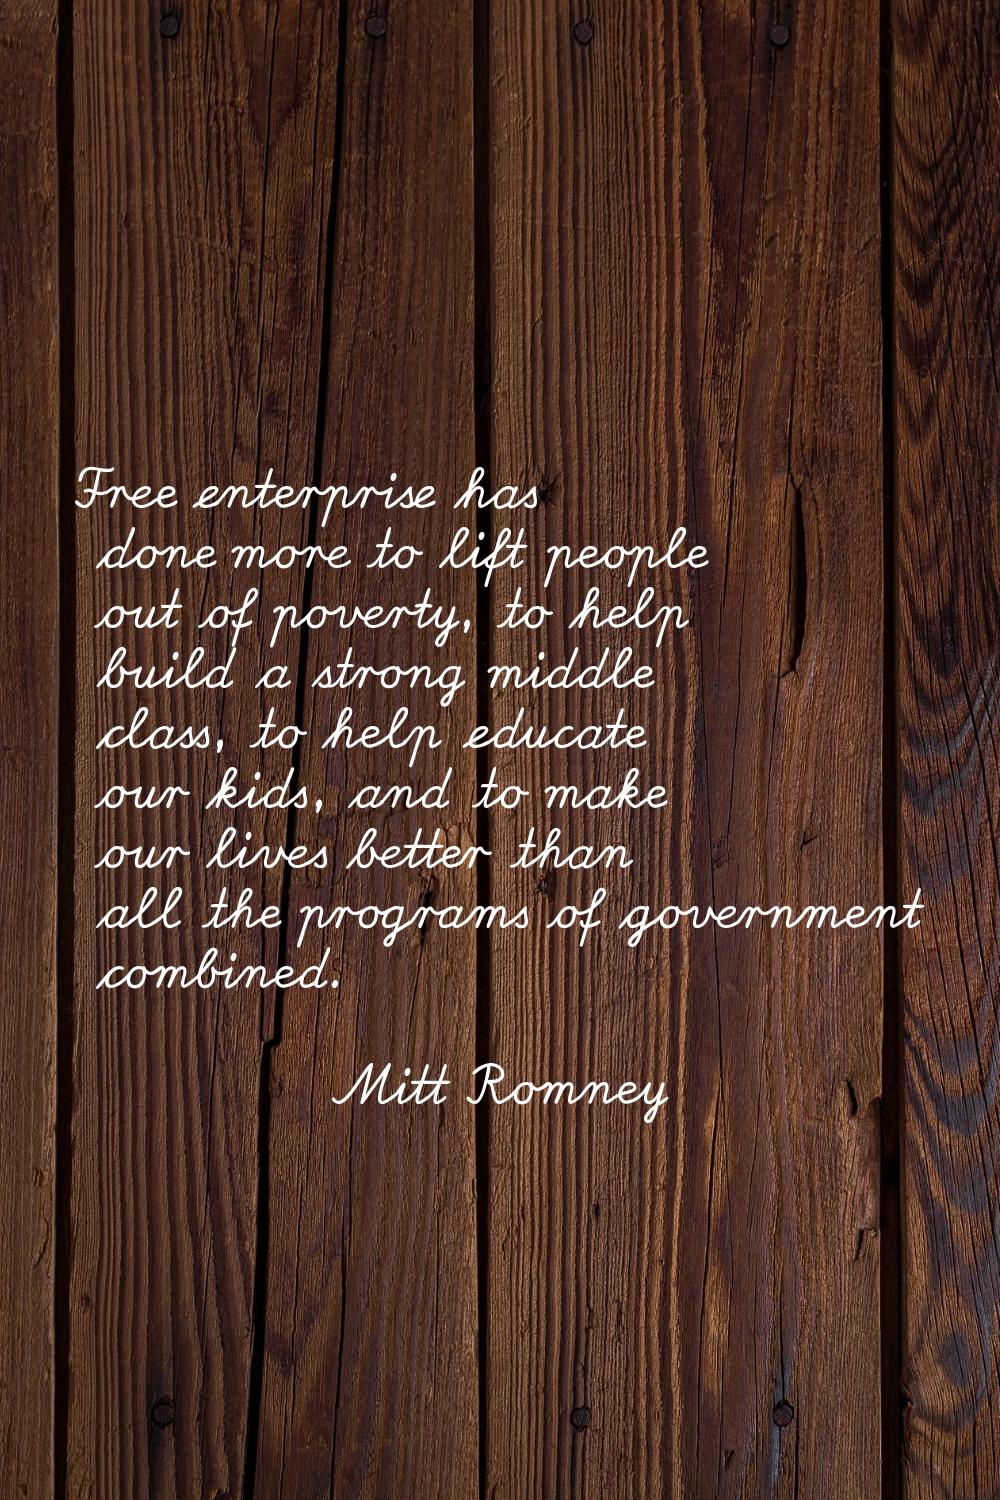 Free enterprise has done more to lift people out of poverty, to help build a strong middle class, t